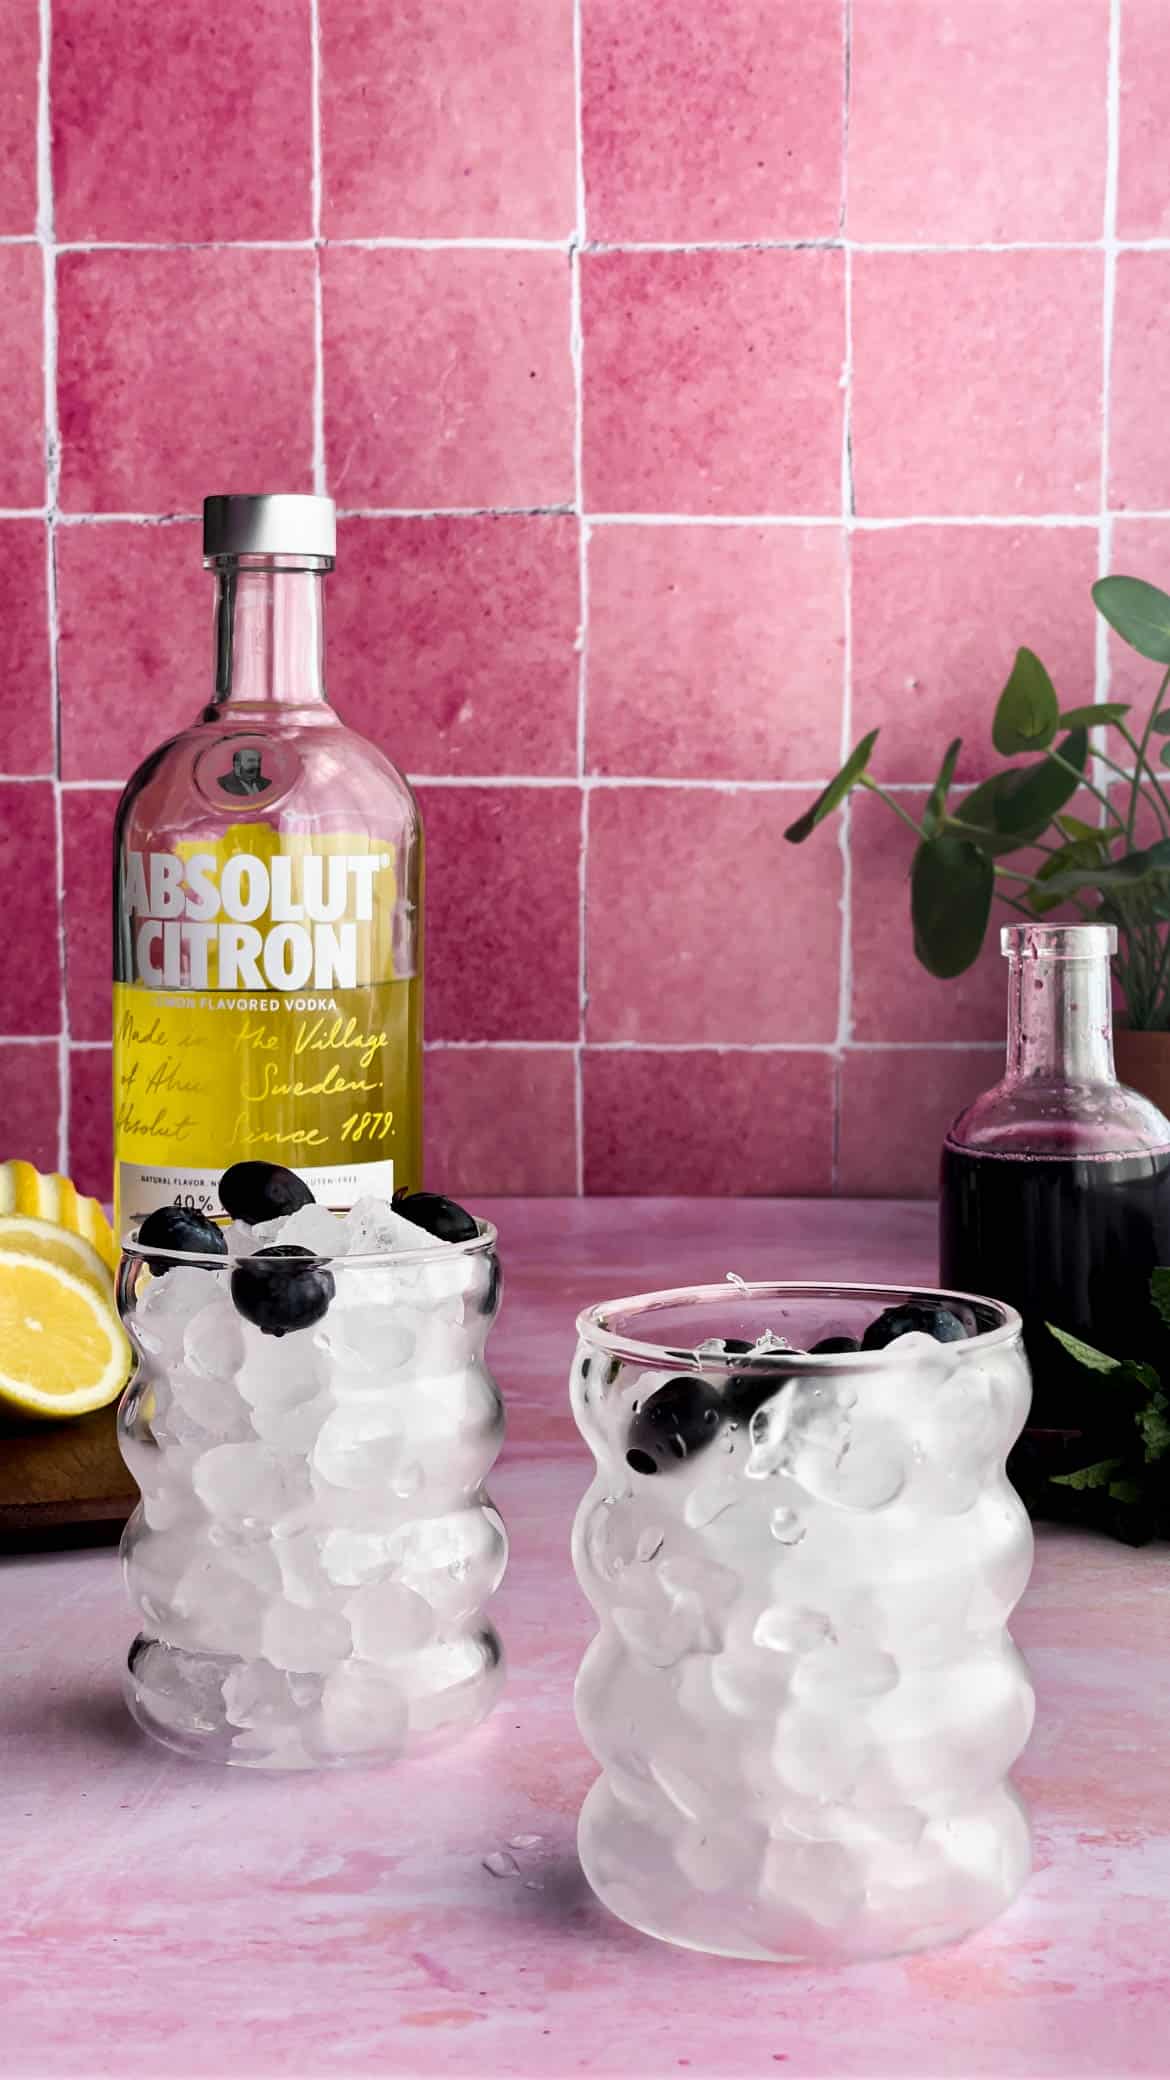 Two cocktail glasses are filled with ice and garnished with blueberries. A bottle of Absolut Citron vodka sits in the background.